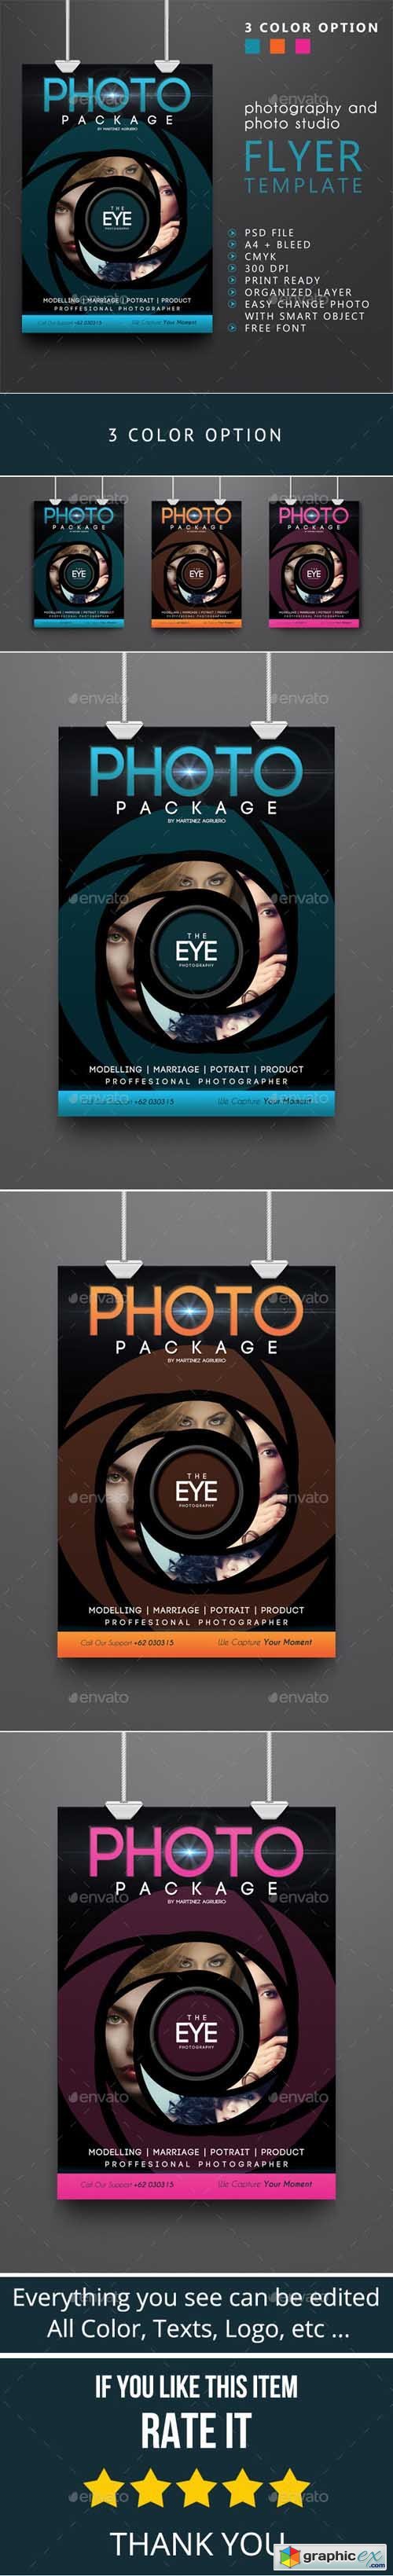 Photography Flyer Template 9345990